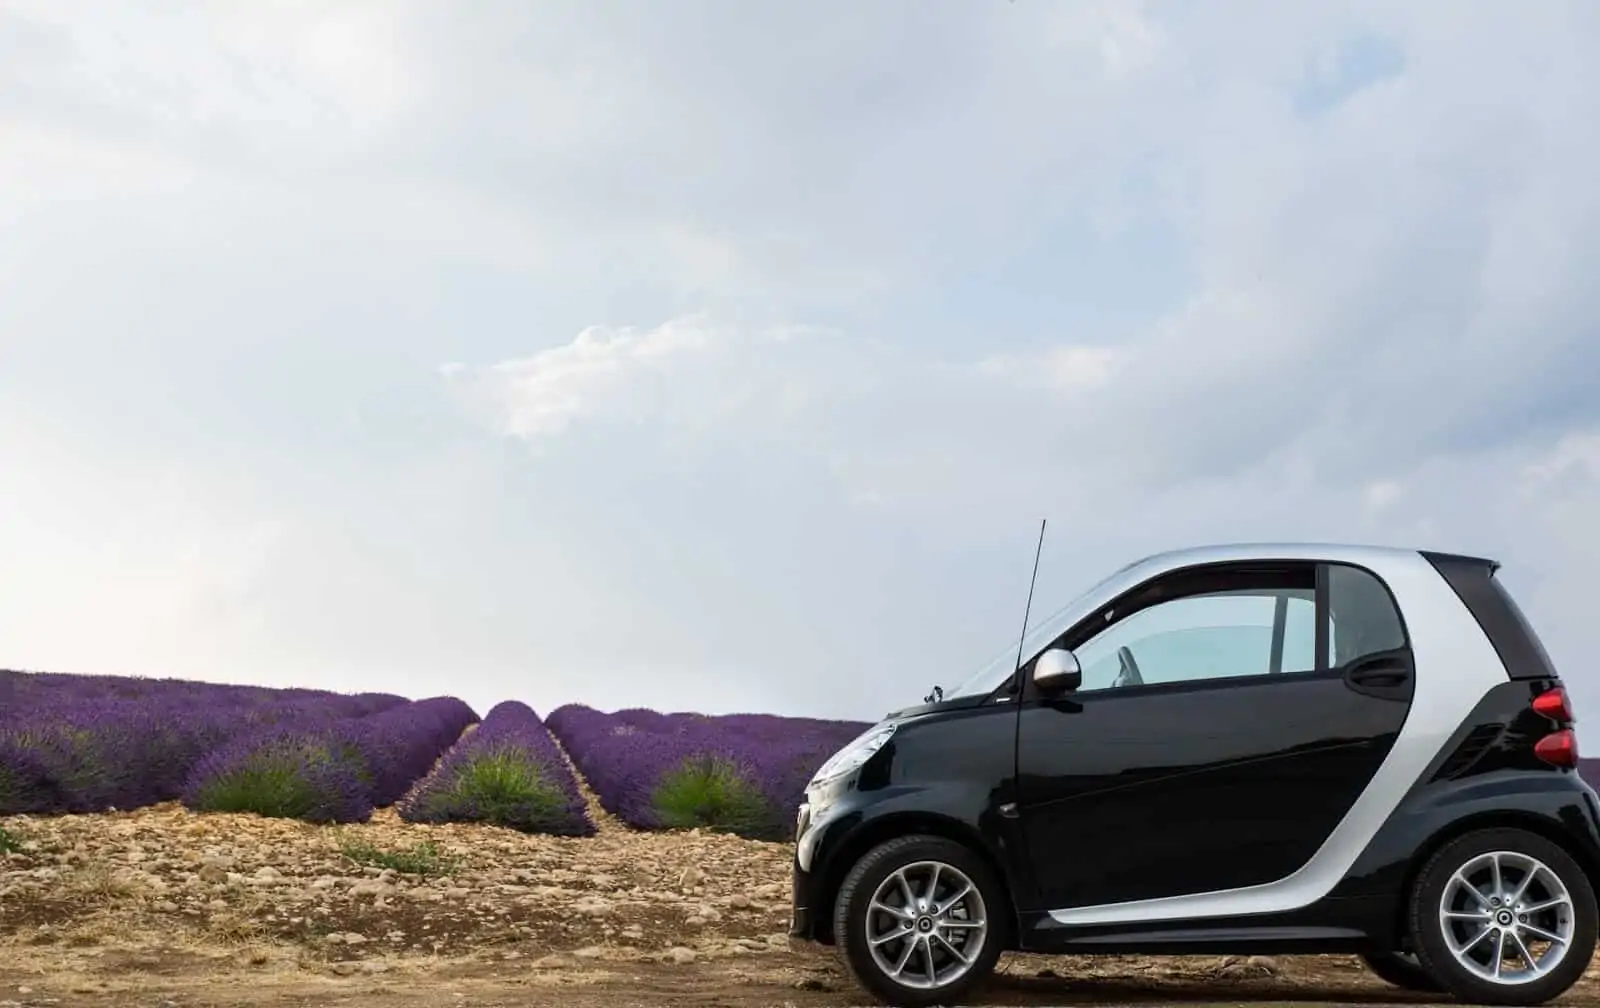 Smart car parked next to flower field